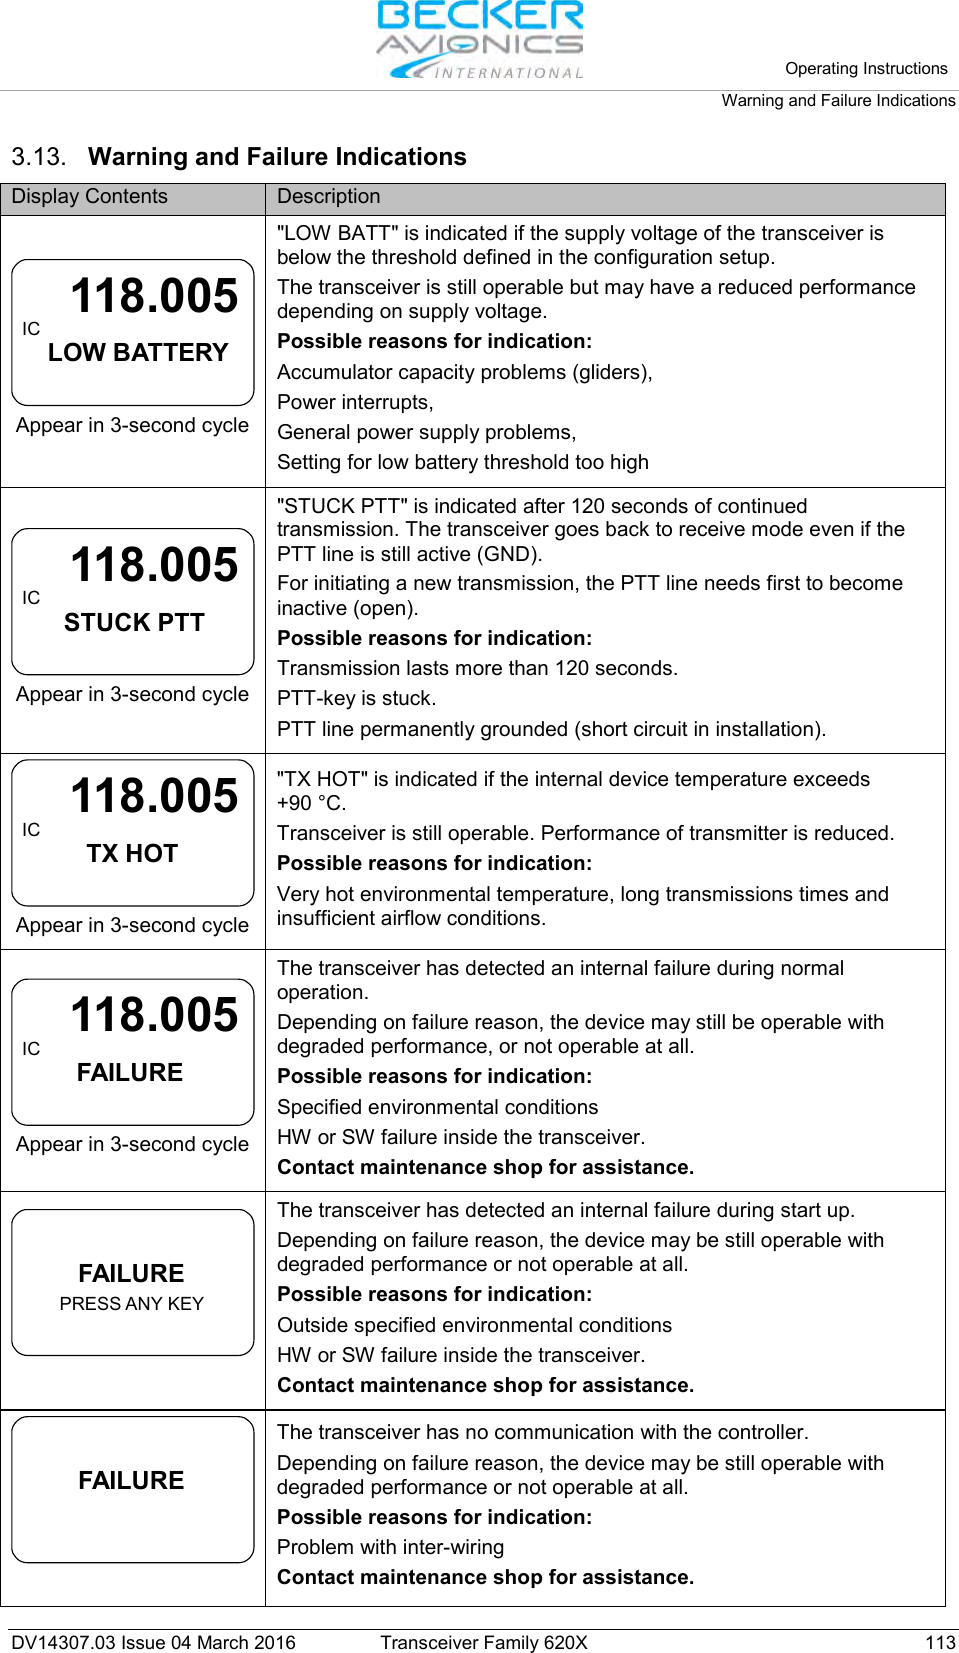   Operating Instructions Warning and Failure Indications  DV14307.03 Issue 04 March 2016 Transceiver Family 620X 113 3.13. Warning and Failure Indications Display Contents Description LOW BATTERYIC118.005 Appear in 3-second cycle &quot;LOW BATT&quot; is indicated if the supply voltage of the transceiver is below the threshold defined in the configuration setup. The transceiver is still operable but may have a reduced performance depending on supply voltage. Possible reasons for indication: Accumulator capacity problems (gliders), Power interrupts, General power supply problems, Setting for low battery threshold too high STUCK PTTIC 118.005 Appear in 3-second cycle &quot;STUCK PTT&quot; is indicated after 120 seconds of continued transmission. The transceiver goes back to receive mode even if the PTT line is still active (GND). For initiating a new transmission, the PTT line needs first to become inactive (open). Possible reasons for indication: Transmission lasts more than 120 seconds. PTT-key is stuck. PTT line permanently grounded (short circuit in installation). TX HOTIC 118.005 Appear in 3-second cycle &quot;TX HOT&quot; is indicated if the internal device temperature exceeds +90 °C. Transceiver is still operable. Performance of transmitter is reduced. Possible reasons for indication: Very hot environmental temperature, long transmissions times and insufficient airflow conditions.  FAILUREIC 118.005 Appear in 3-second cycle The transceiver has detected an internal failure during normal operation. Depending on failure reason, the device may still be operable with degraded performance, or not operable at all. Possible reasons for indication: Specified environmental conditions HW or SW failure inside the transceiver. Contact maintenance shop for assistance. FAILUREPRESS ANY KEY  The transceiver has detected an internal failure during start up. Depending on failure reason, the device may be still operable with degraded performance or not operable at all. Possible reasons for indication: Outside specified environmental conditions HW or SW failure inside the transceiver. Contact maintenance shop for assistance. FAILURE  The transceiver has no communication with the controller. Depending on failure reason, the device may be still operable with degraded performance or not operable at all. Possible reasons for indication: Problem with inter-wiring Contact maintenance shop for assistance. 